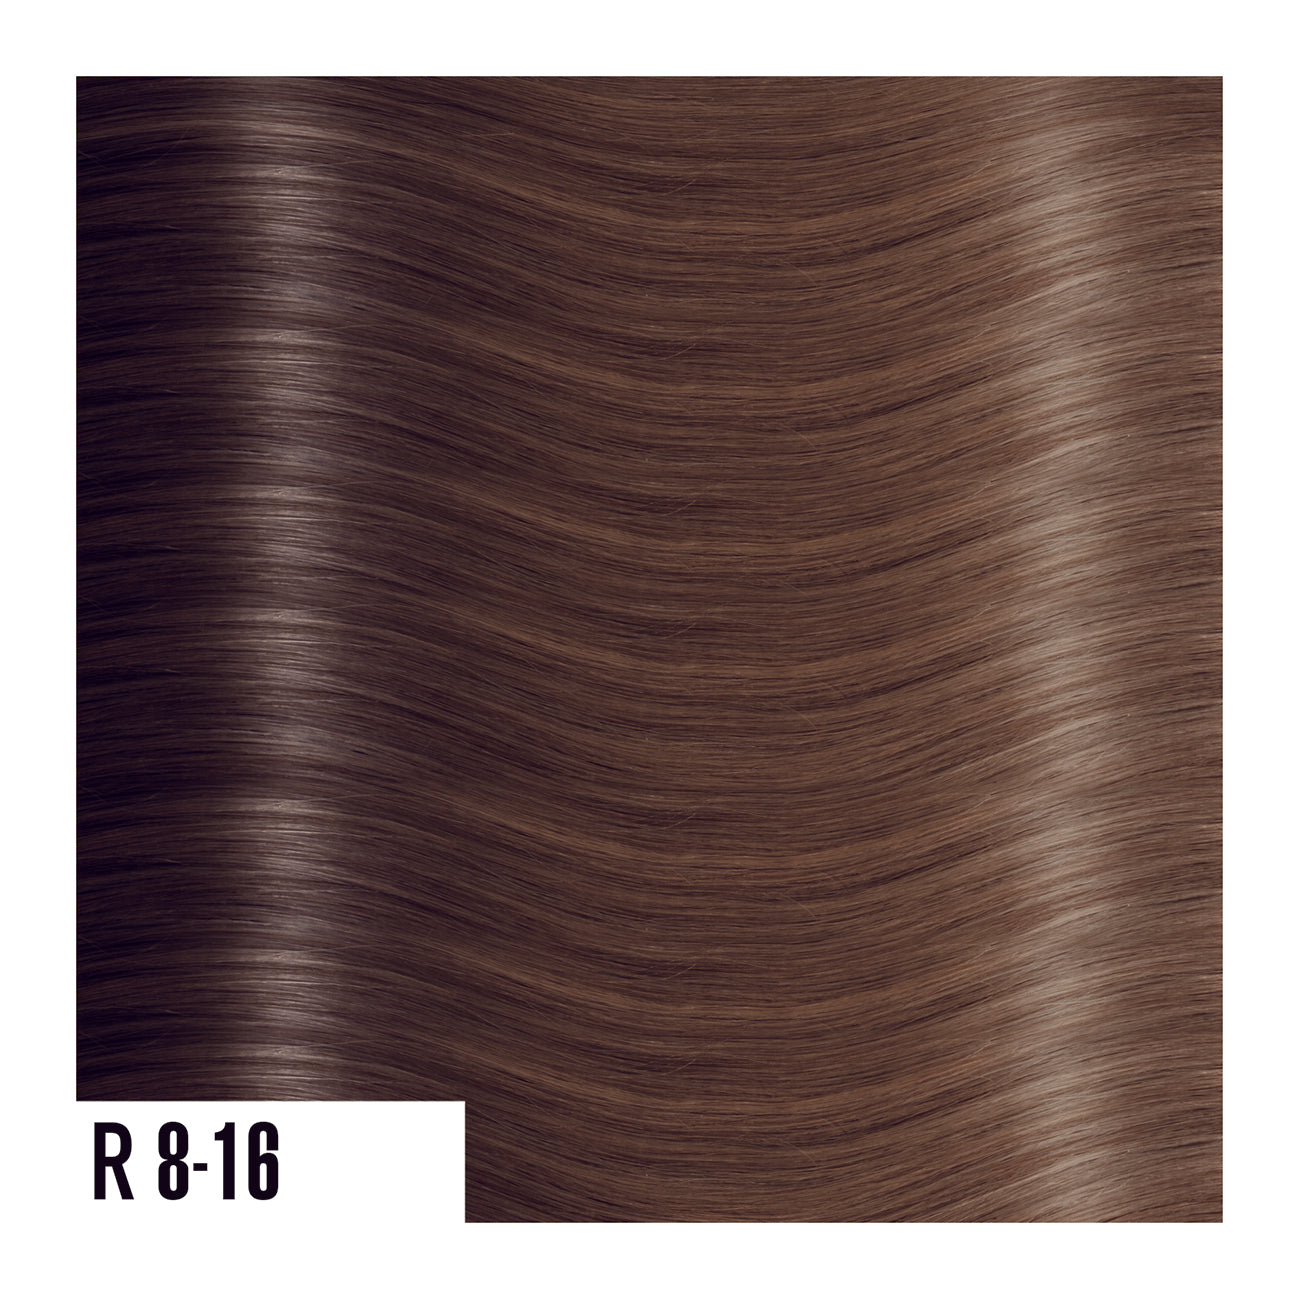 R8-16 - Rooted Prime Tape In Brown Fade Into Light Brown -Ombre colors are a beautiful gradual blend of 3 colors with darker roots and lighter ends.  